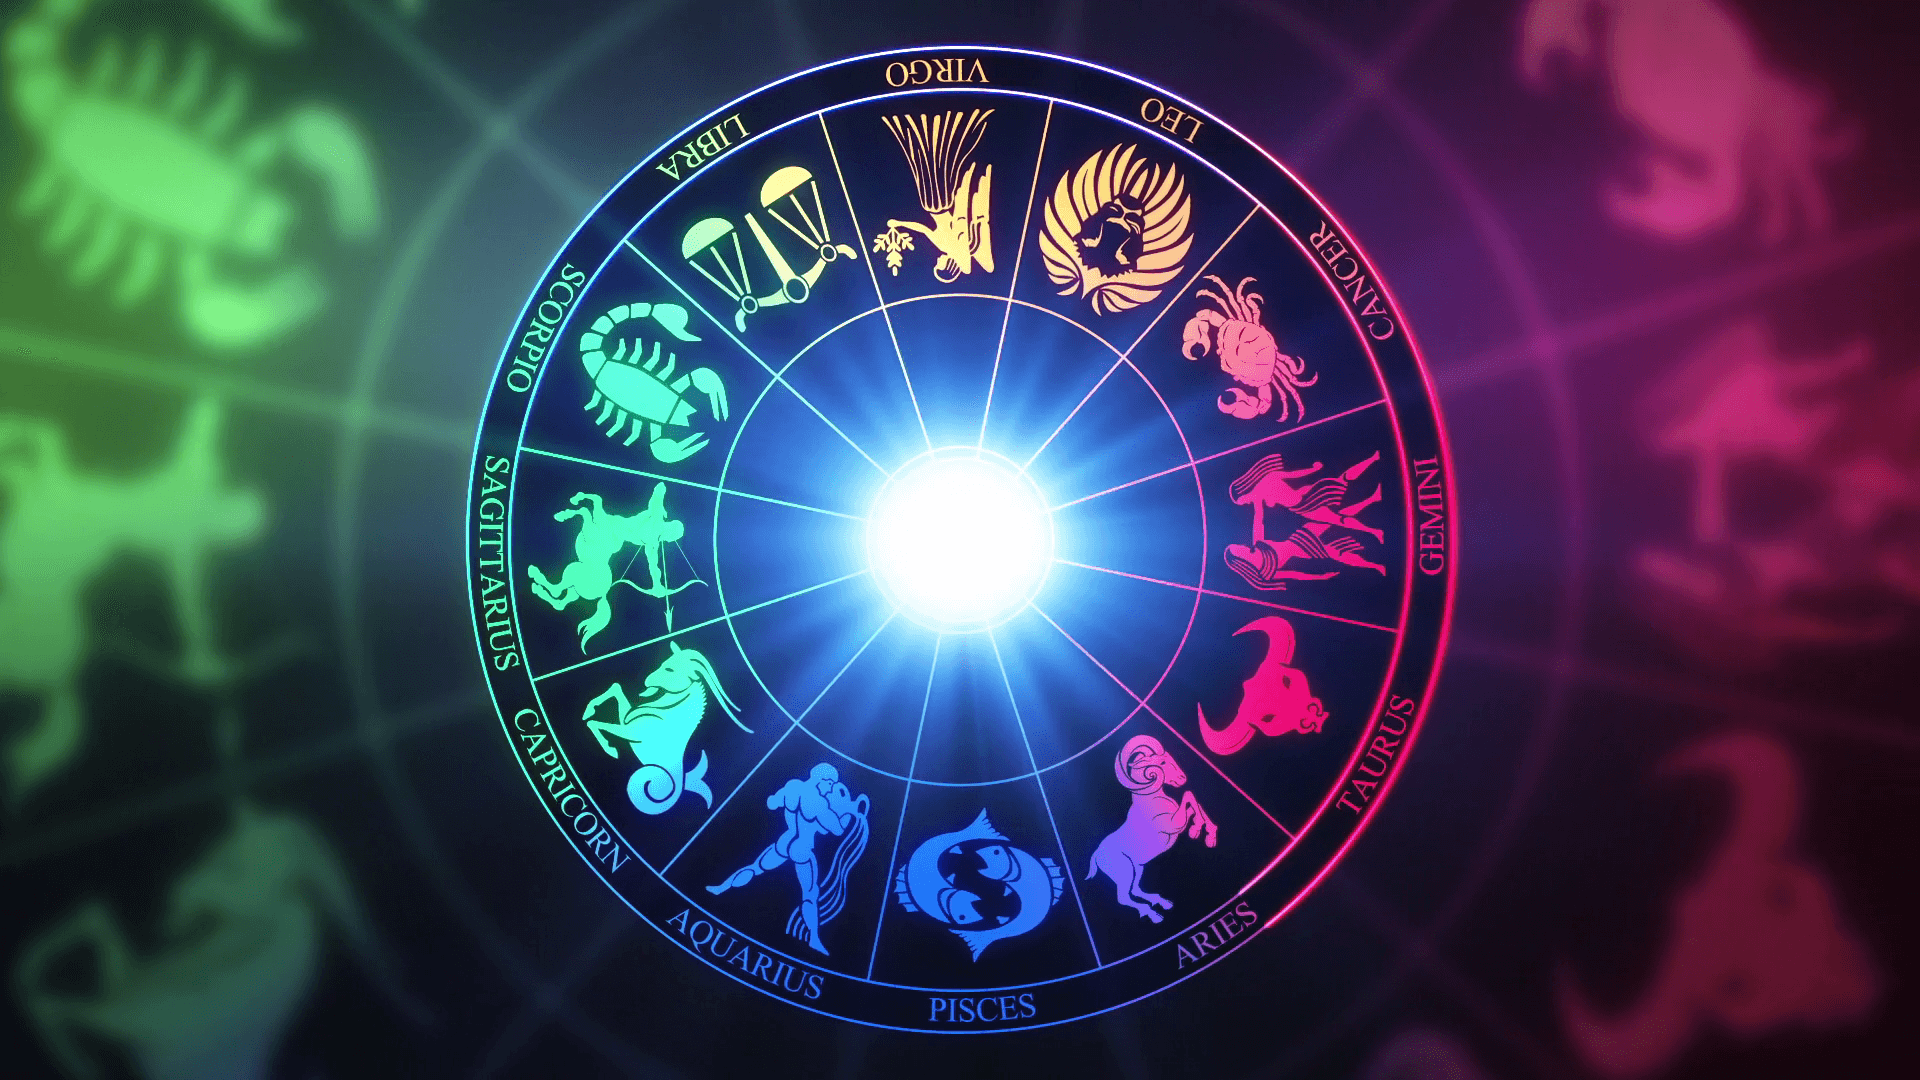 A Colorful Astrological Wheel With Zodiac Signs